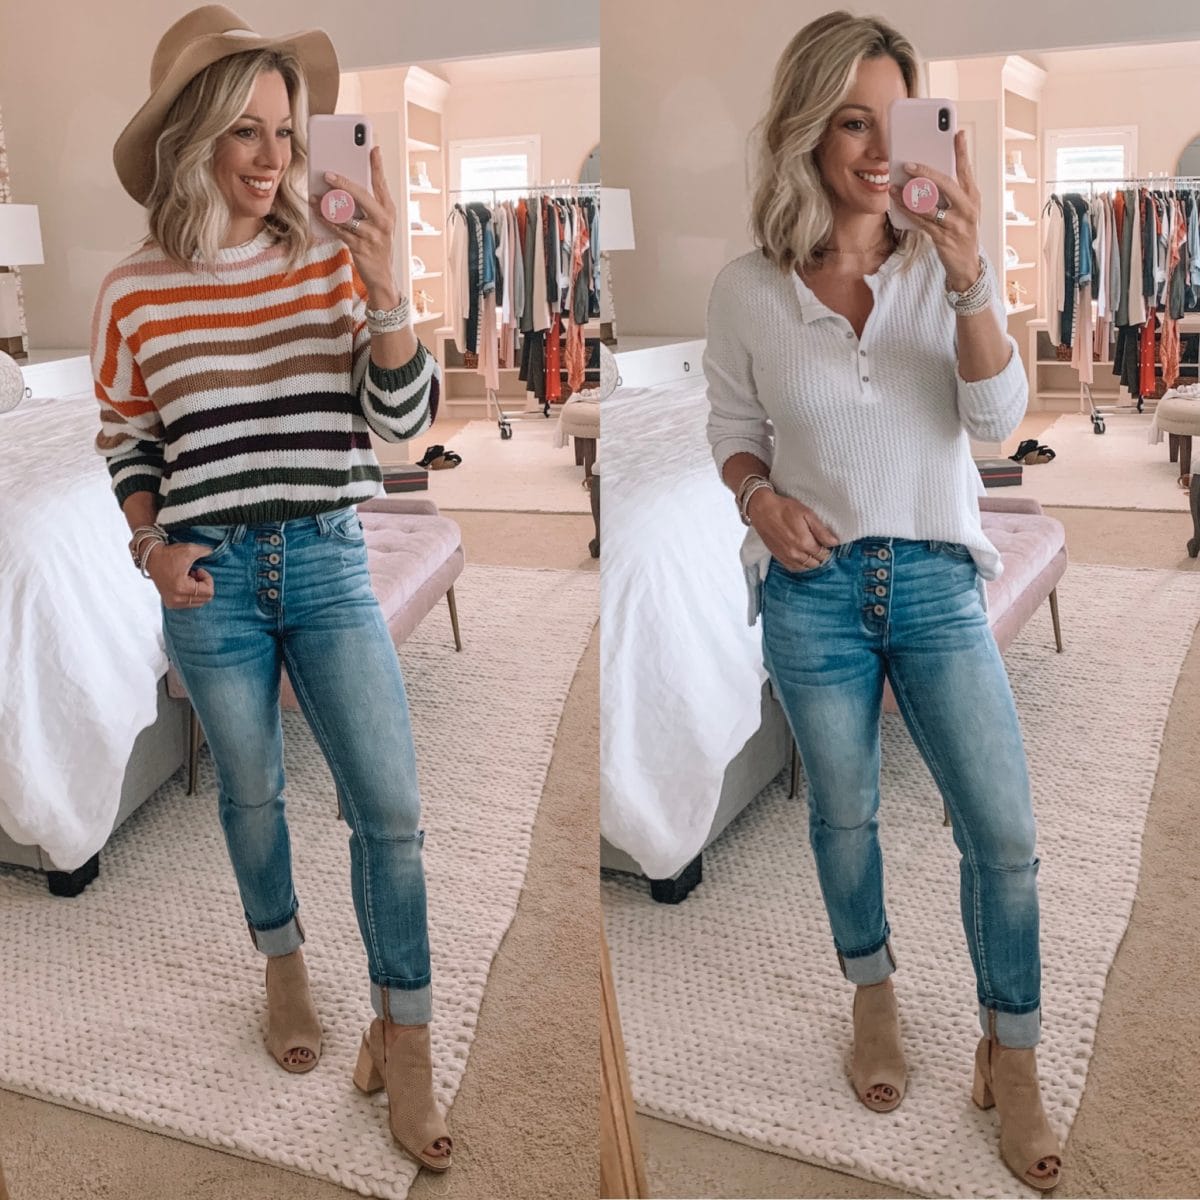 Colorful Striped Sweater, White Thermal Top